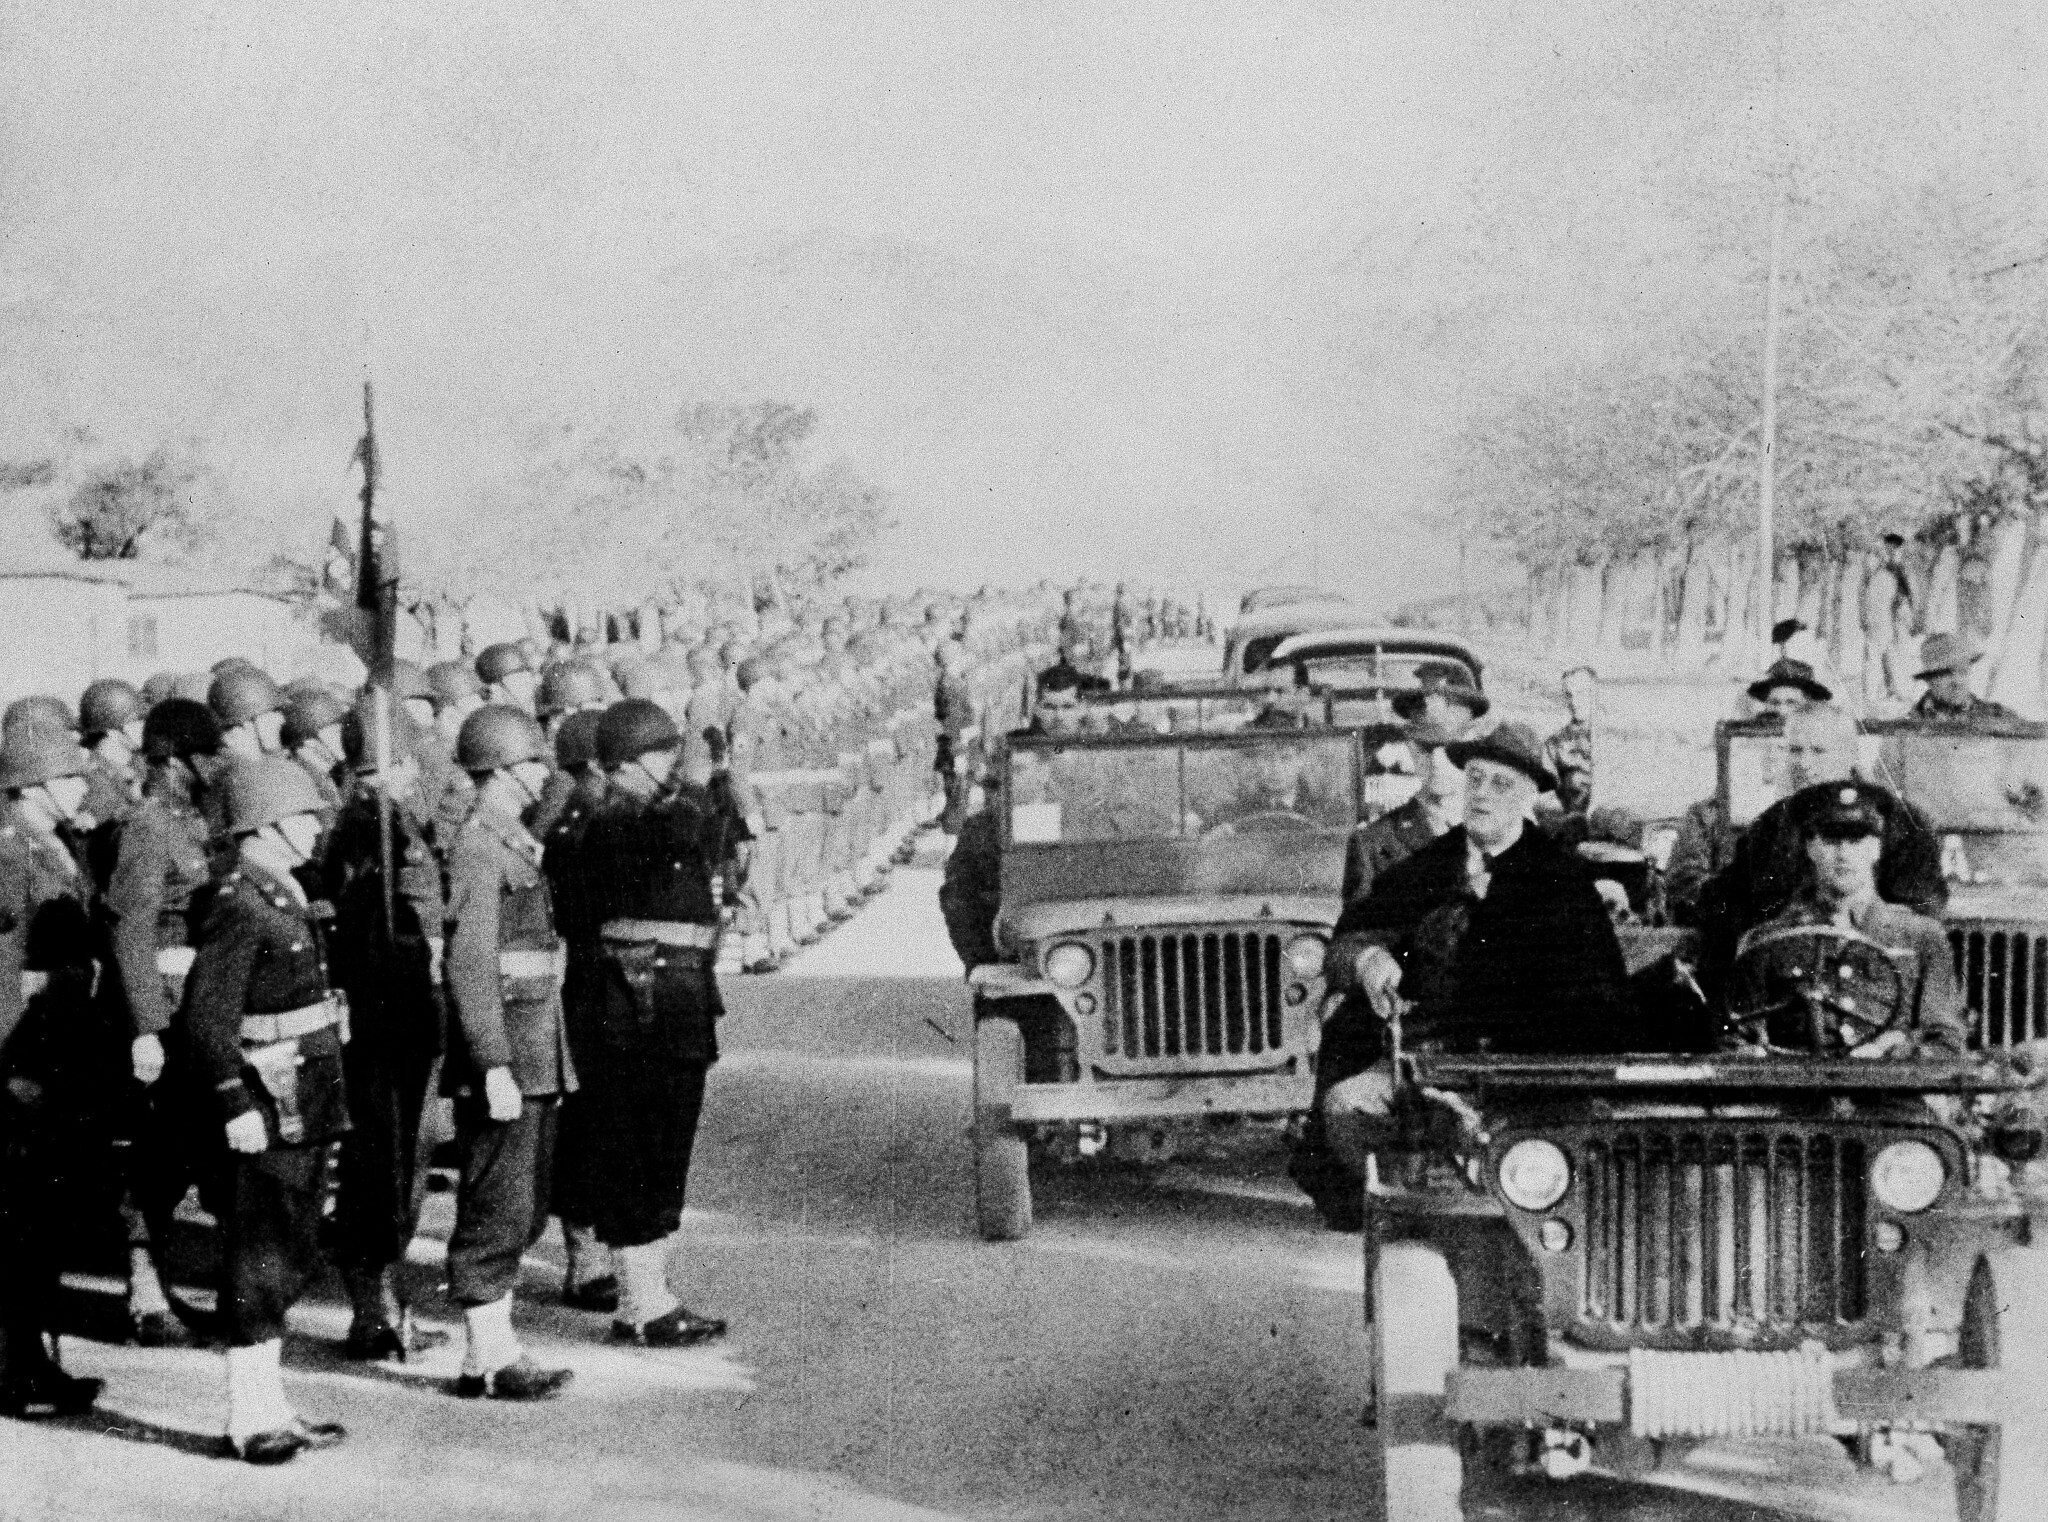 President Franklin D. Roosevelt reviews US troops from a jeep at an Army station in Tehran, Iran, after his conference with Winston Churchill and Joseph Stalin, December 14, 1943. (AP Photo/International News Photos)